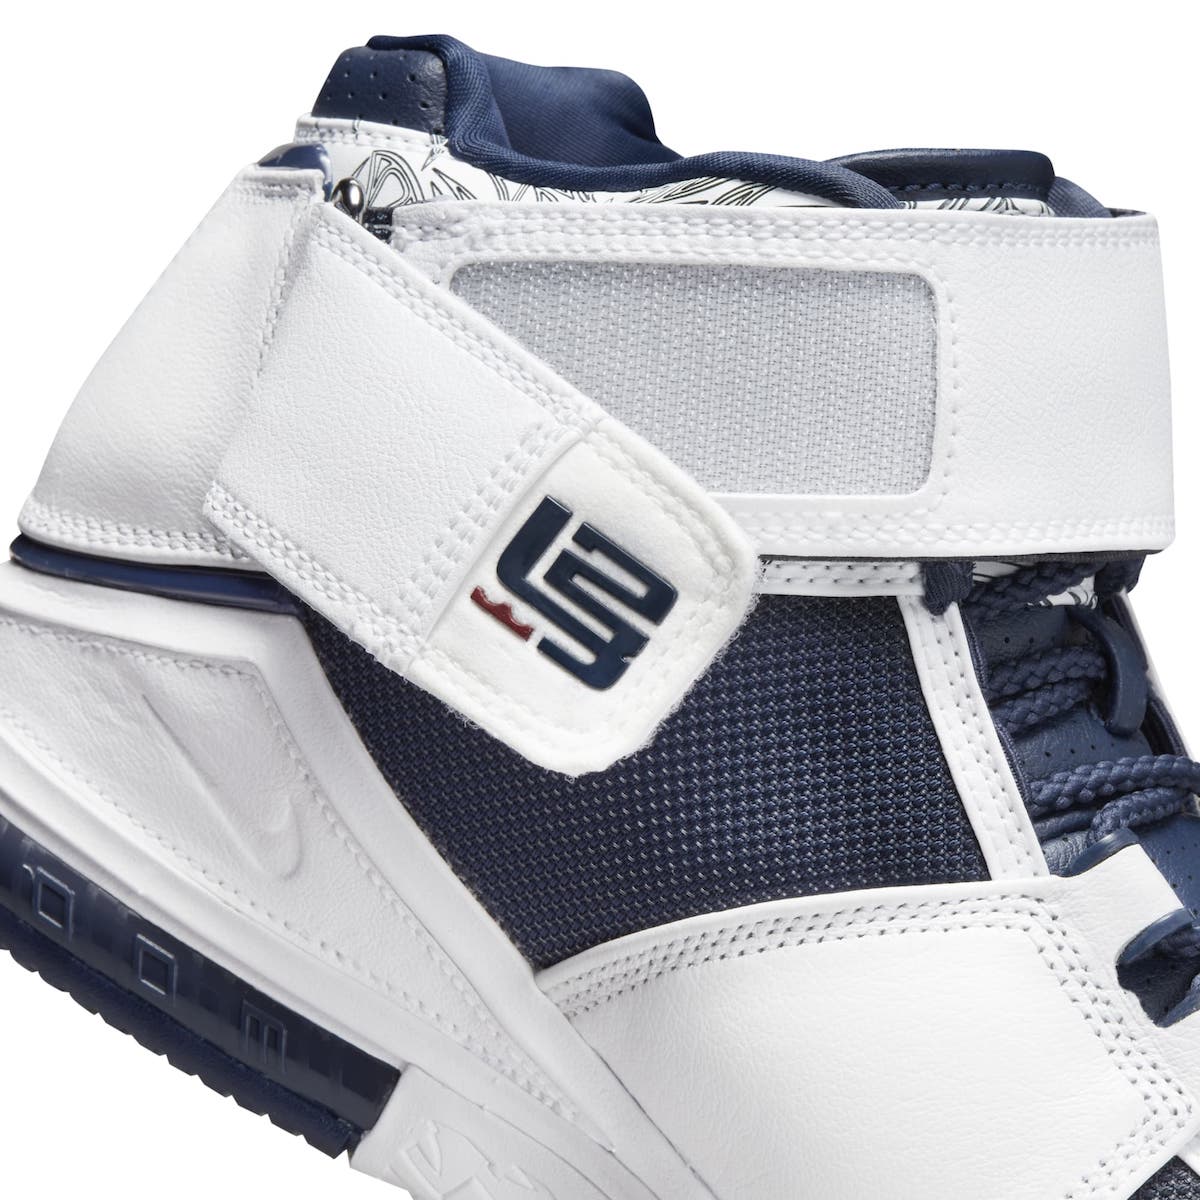 Nike-LeBron-2-USA-Midnight-Navy-2022-DR0826-100-Release-Date-9.jpeg